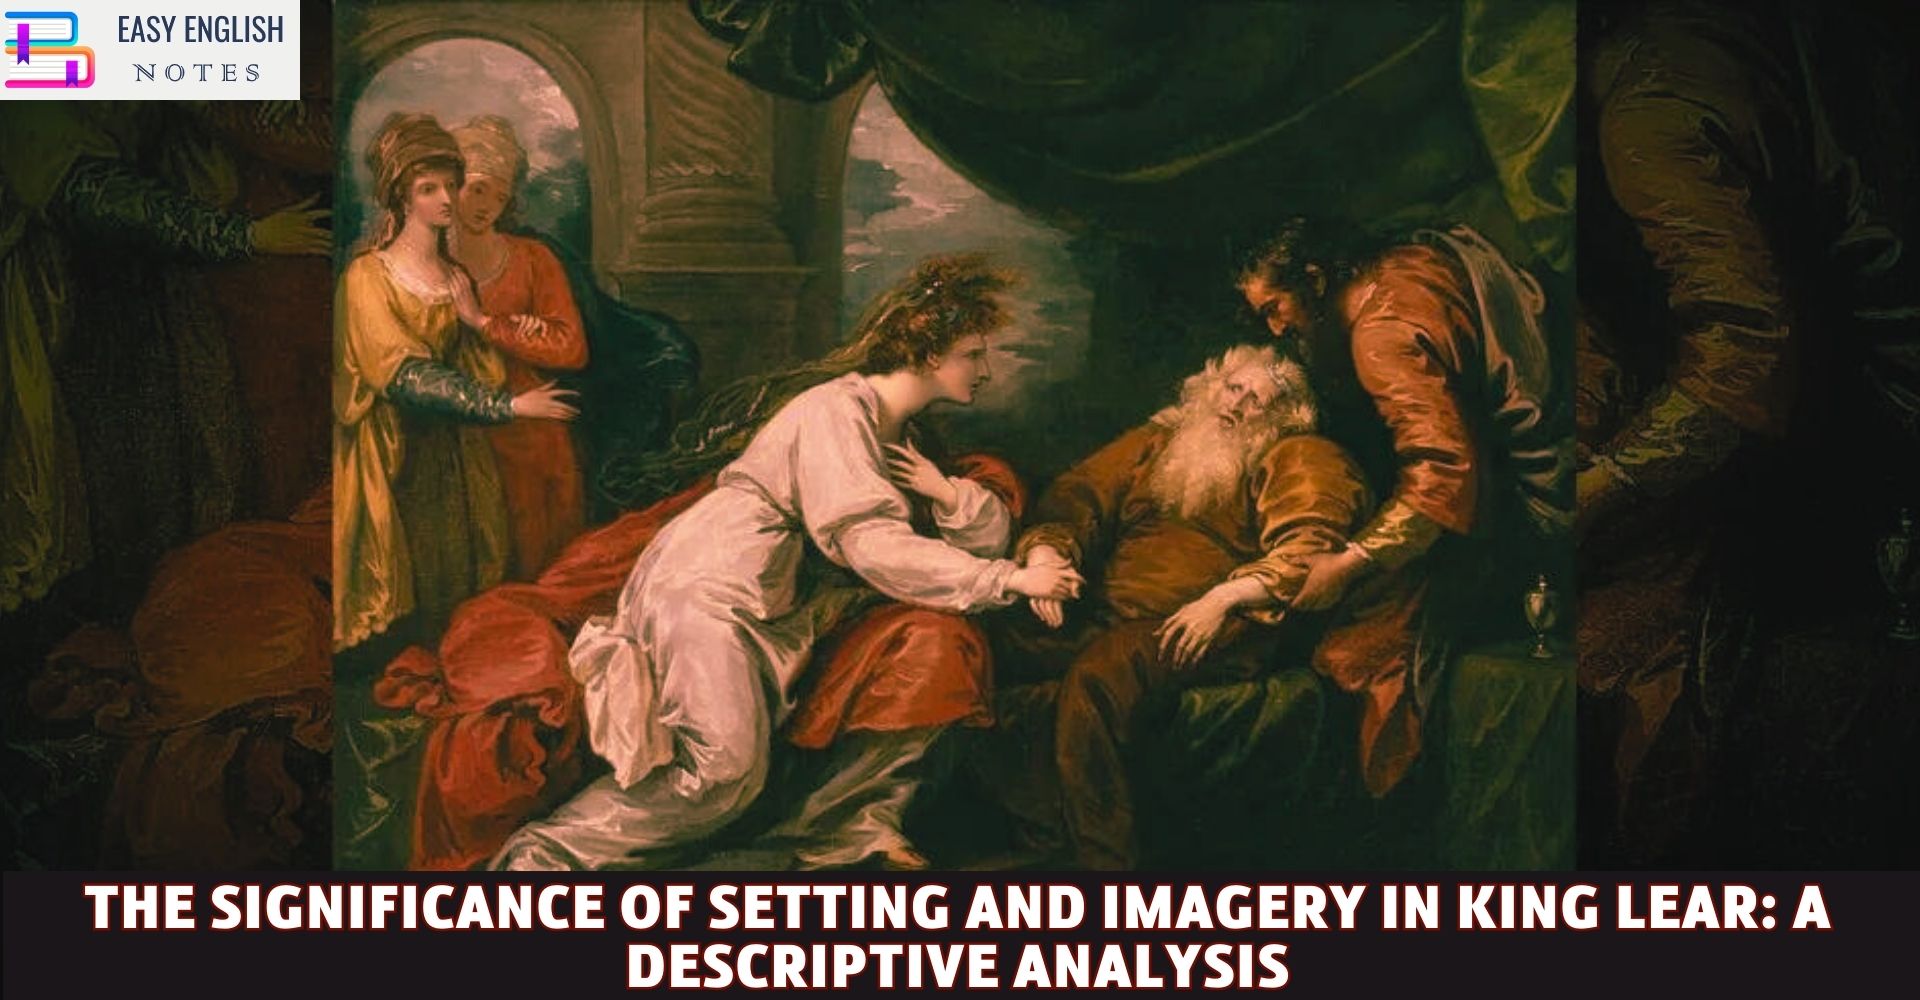 The Significance of Setting and Imagery in King Lear: A Descriptive Analysis